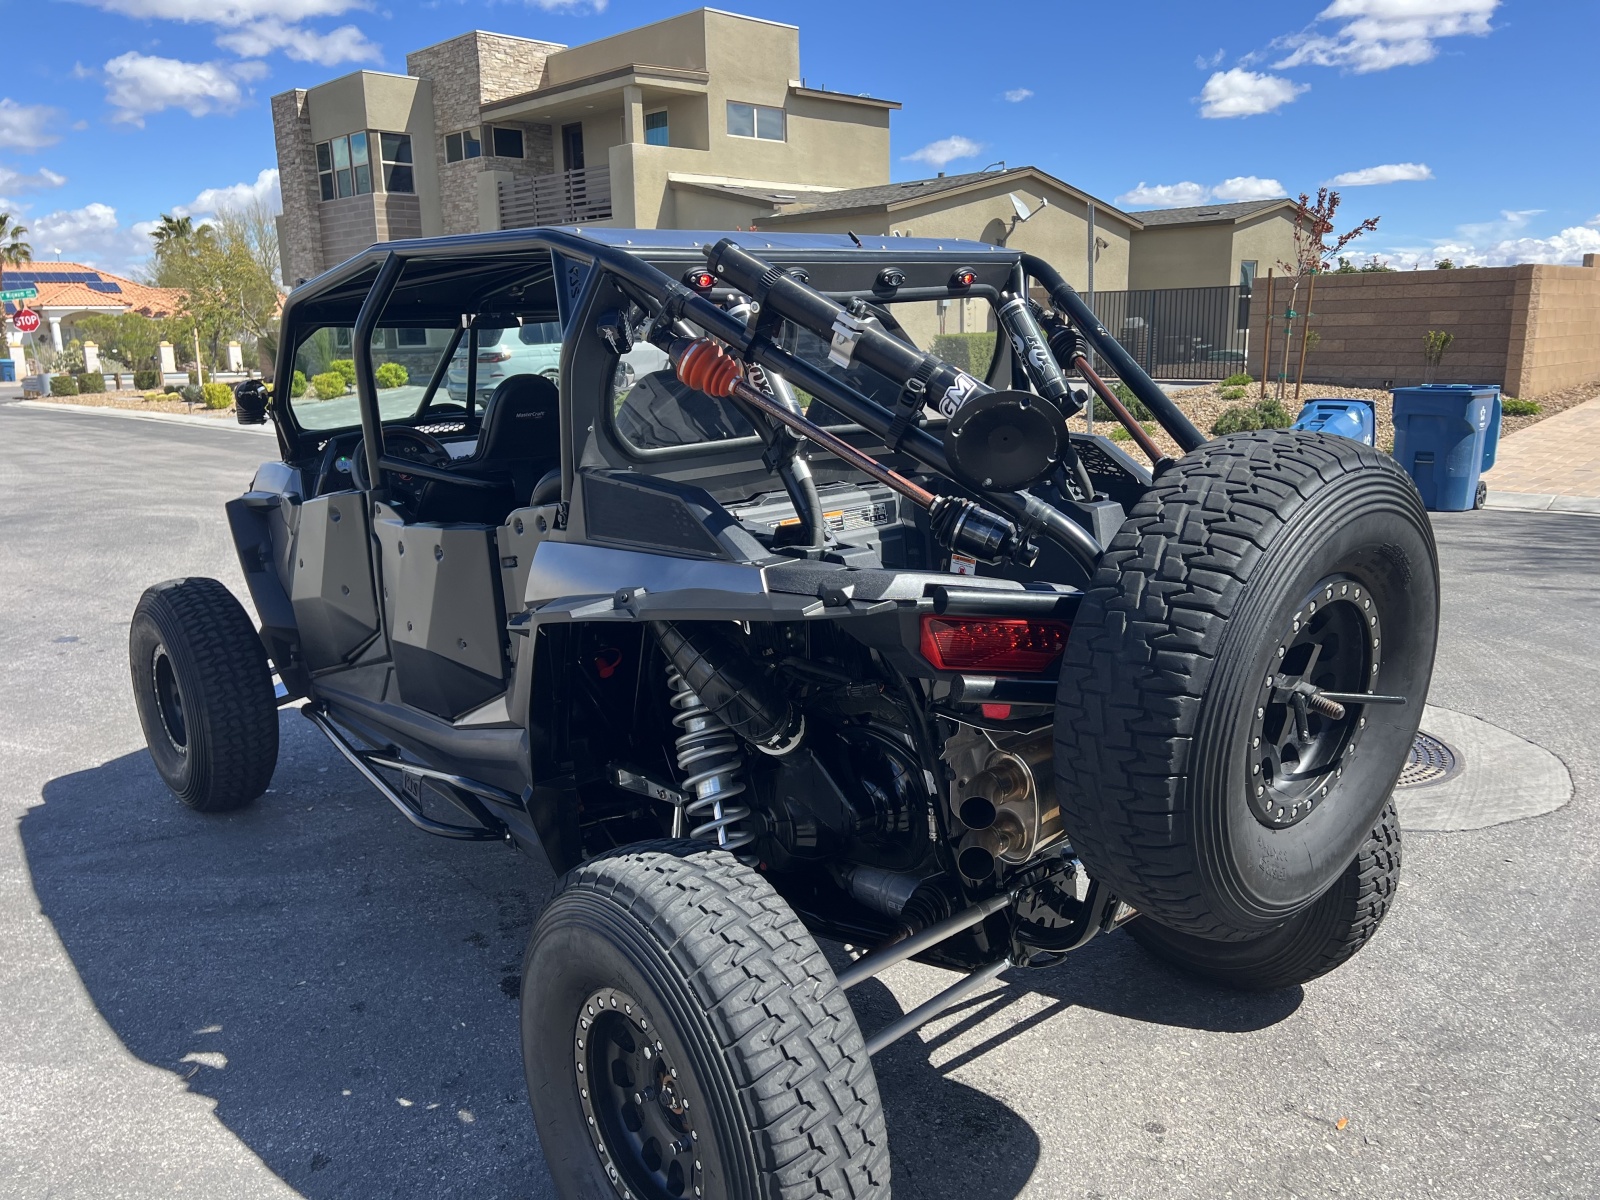 For Sale: 2017 Polaris RZR XP 4 Turbo with 1825 miles 79 hours- freshly serviced.  - photo7